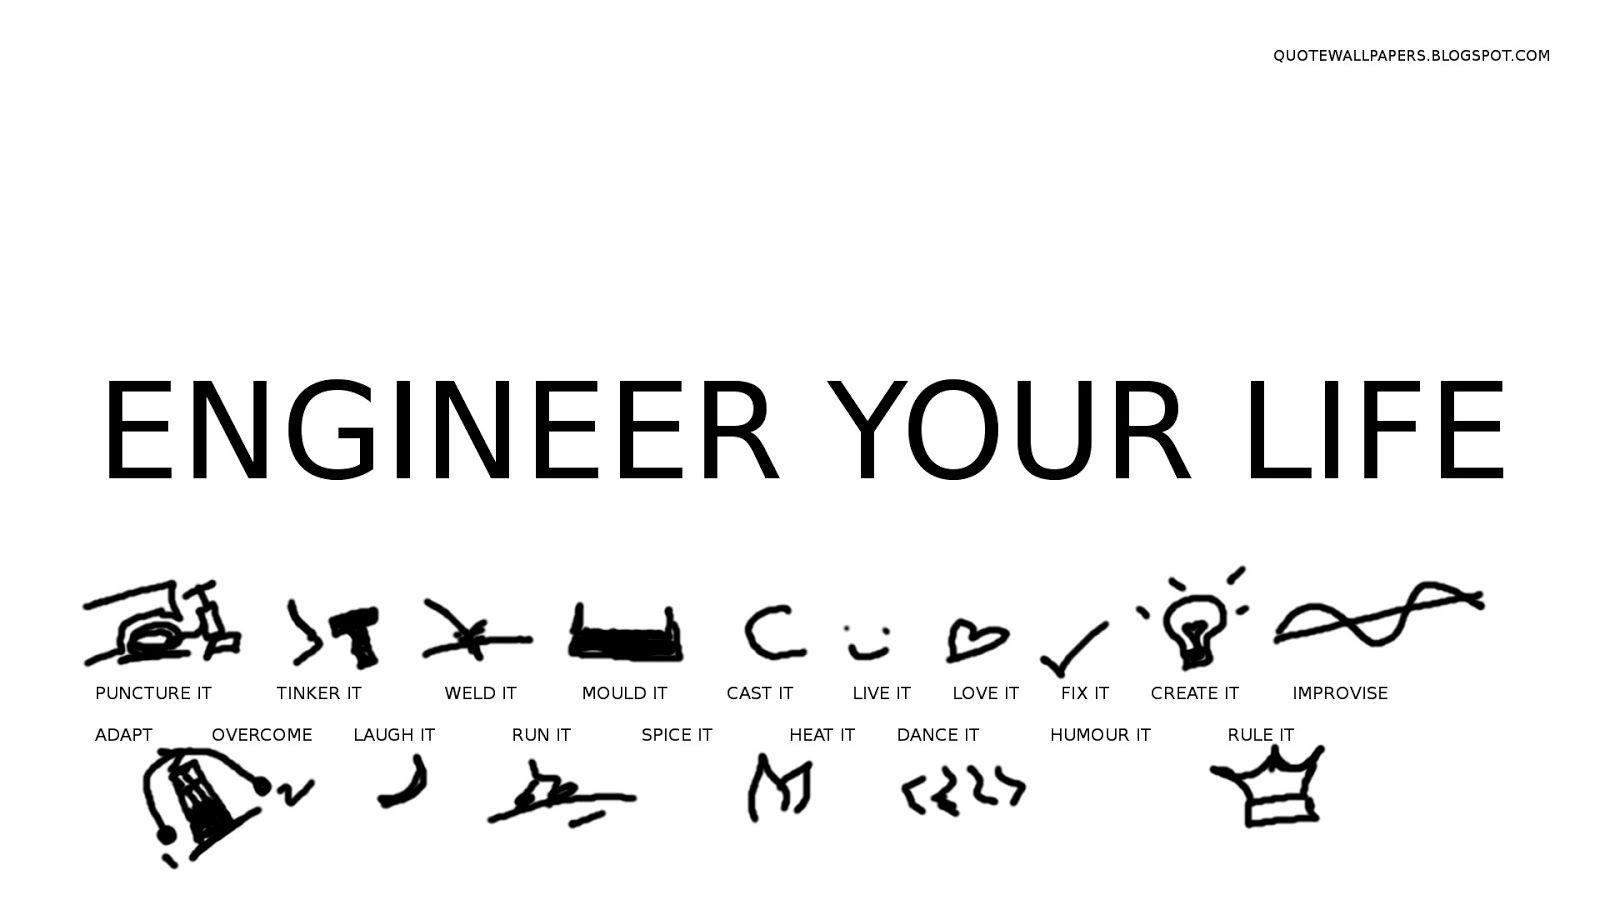 Funny Wallpaper Related Engineering